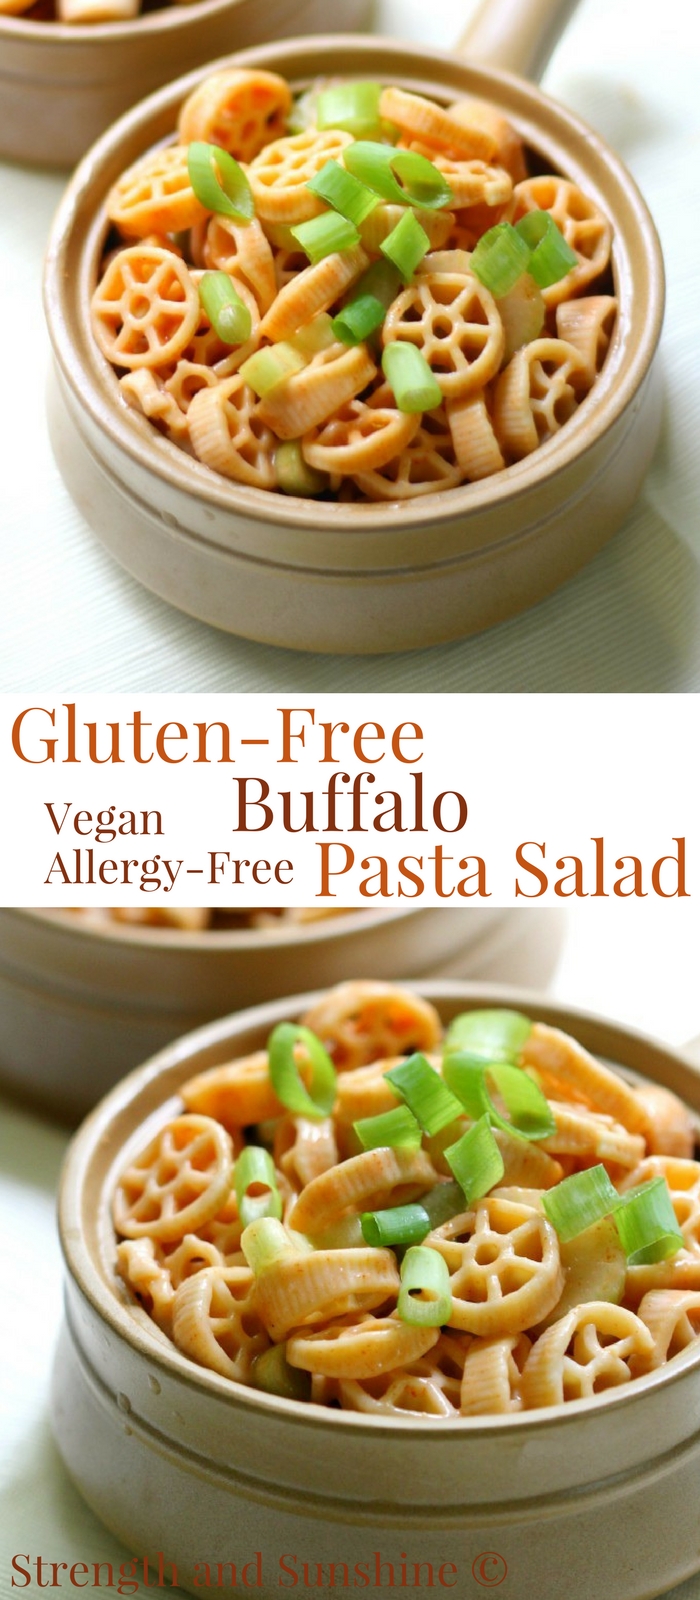 Gluten-Free Buffalo Pasta Salad (Vegan, Allergy-free) | Strength and Sunshine @RebeccaGF666 A bold and spicy side dish recipe for your next party or tailgate! This healthy Gluten-Free Buffalo Pasta Salad is vegan, top-8 allergy-free, and super quick and easy to whip up! There's no lack of flavor in this creamy American staple! #glutenfree #pastasalad #buffalo #glutenfreepasta #tailgating